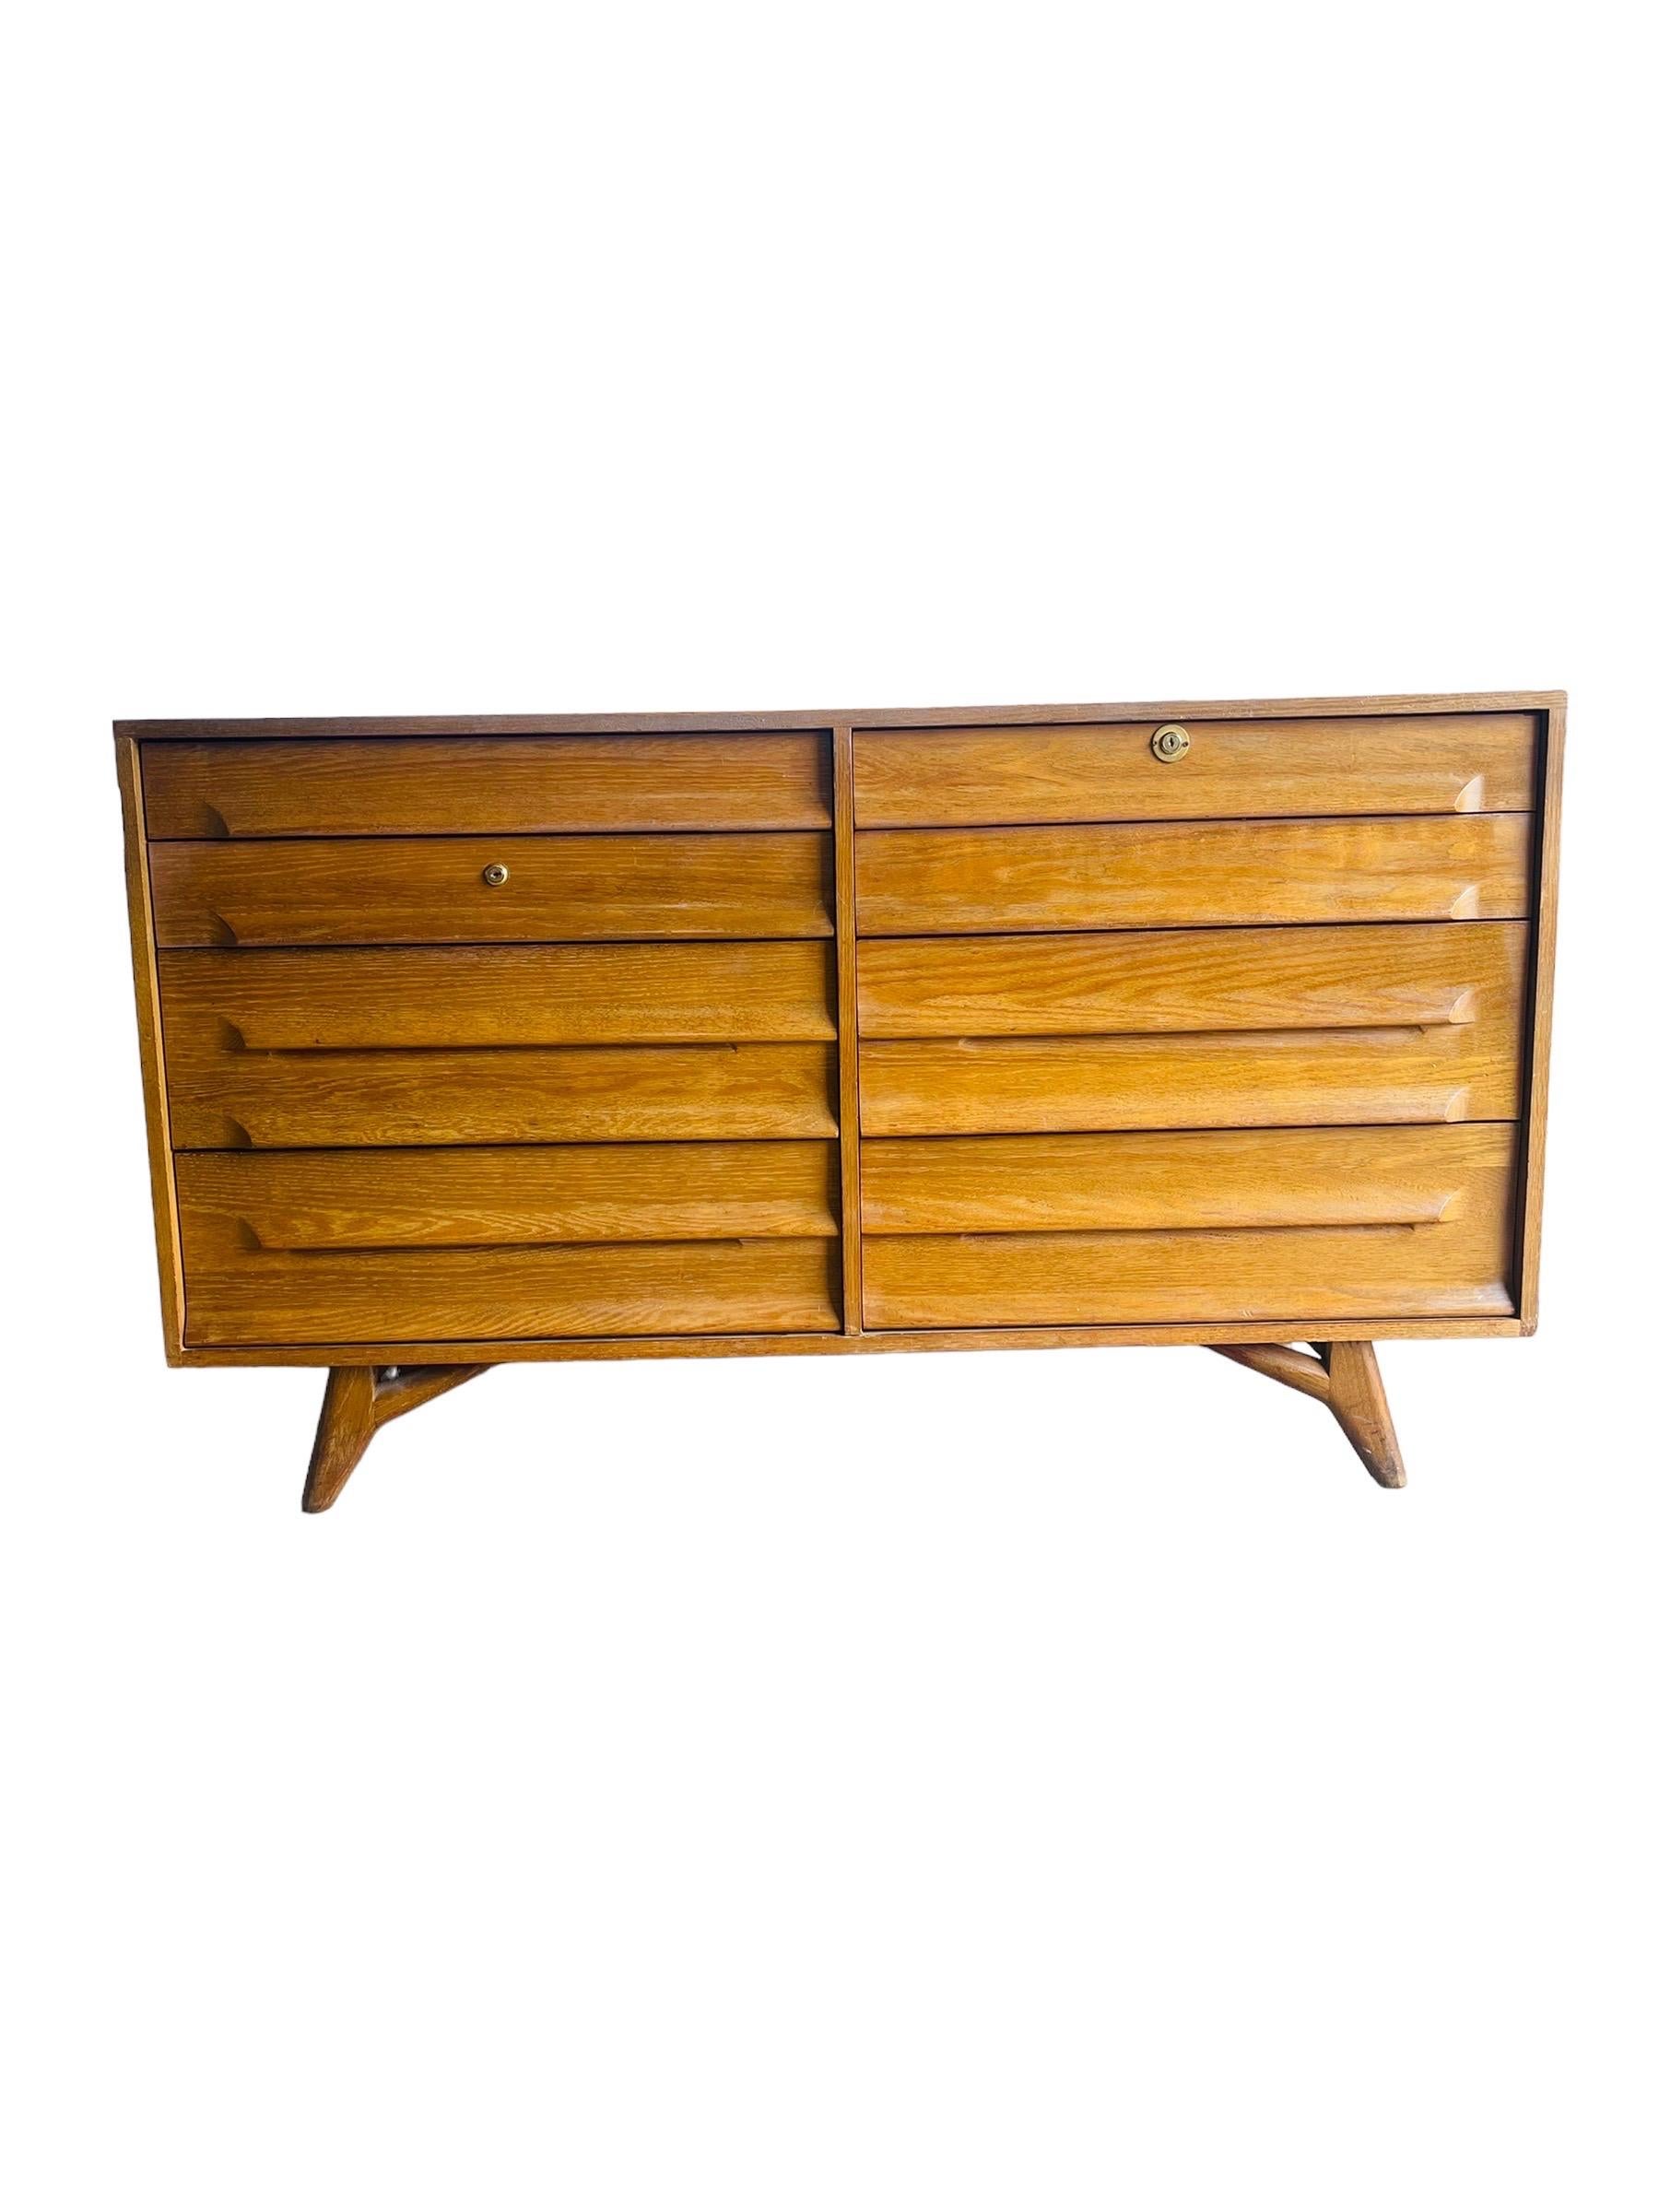 Mid Century American Modern dresser by Jack Van Der Molen for Americana Casual. This solid Oak dresser is equipped with eight drawers and sculptured legs. This dresser is in good original vintage condition with wear consistent with age and use.